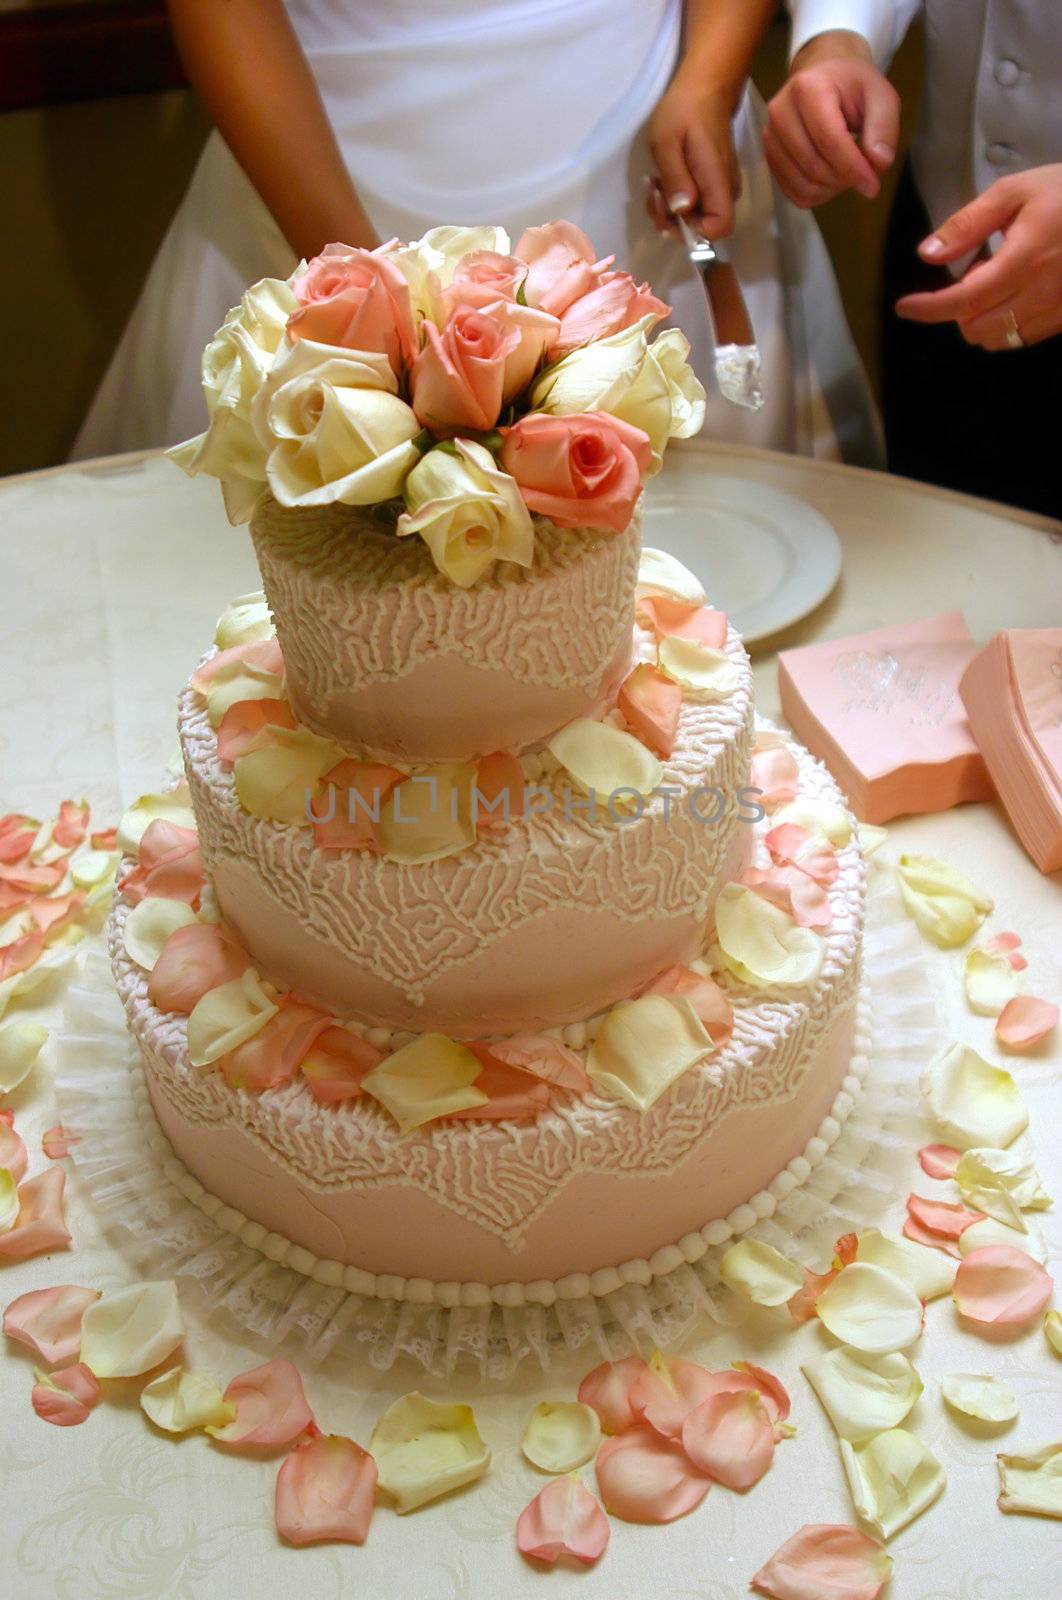 Cake Cutting by fullvision